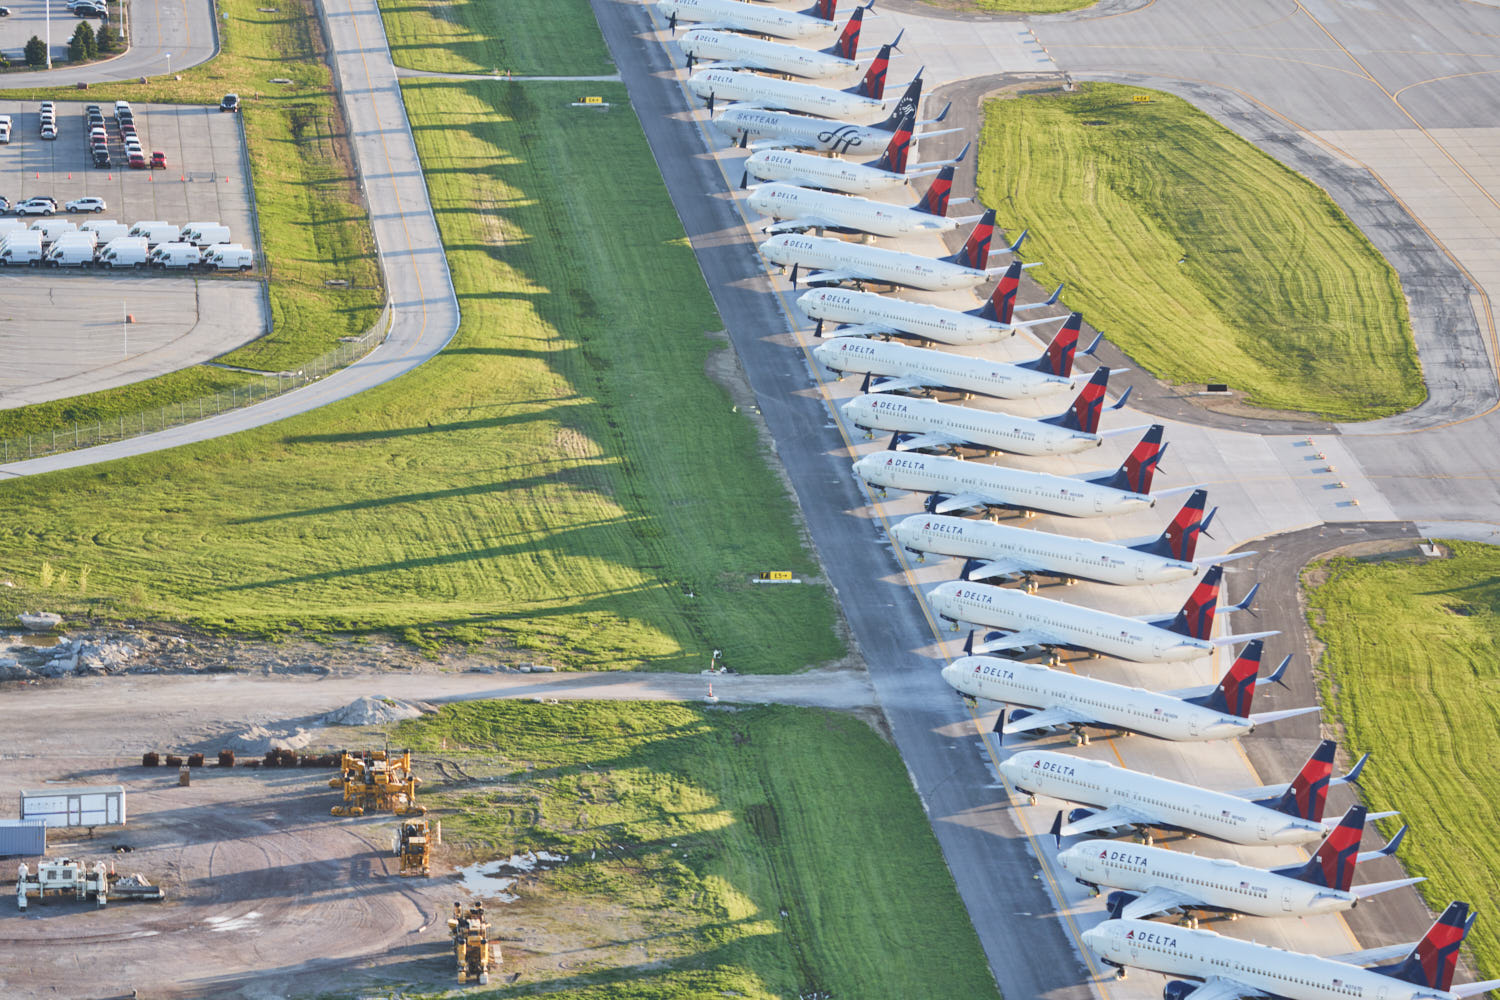 an aerial view of airplanes parked on a runway